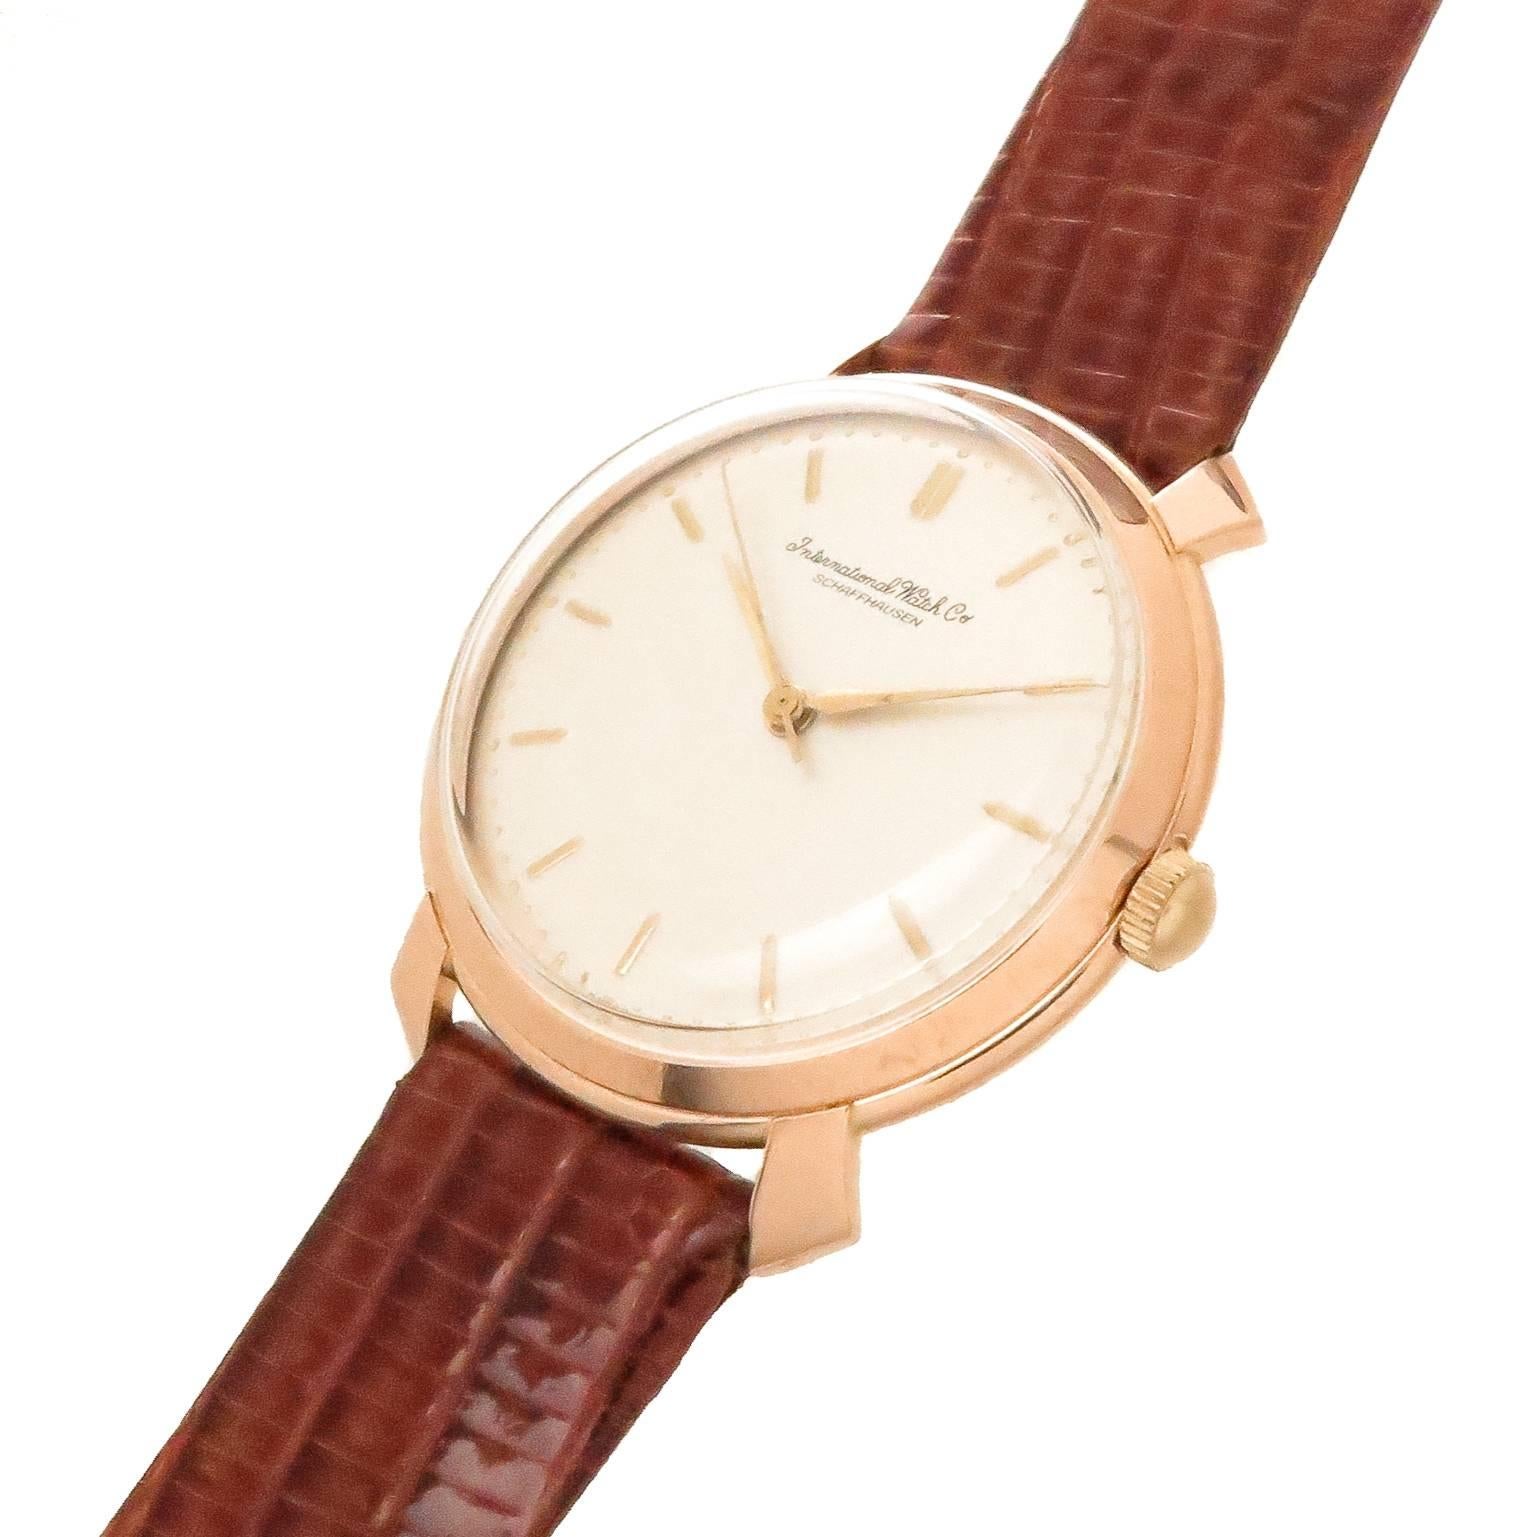 Circa 1940s International Watch Company IWC Schaffhausen Wrist Watch.  37 MM 18K Rose Gold 3 Piece case with Flared Lugs. Caliber C.89  17 Jewel Manual Wind Nickel Lever movement.  Silvered Dial with raised Gold markers, Gold Hands and a Sweep